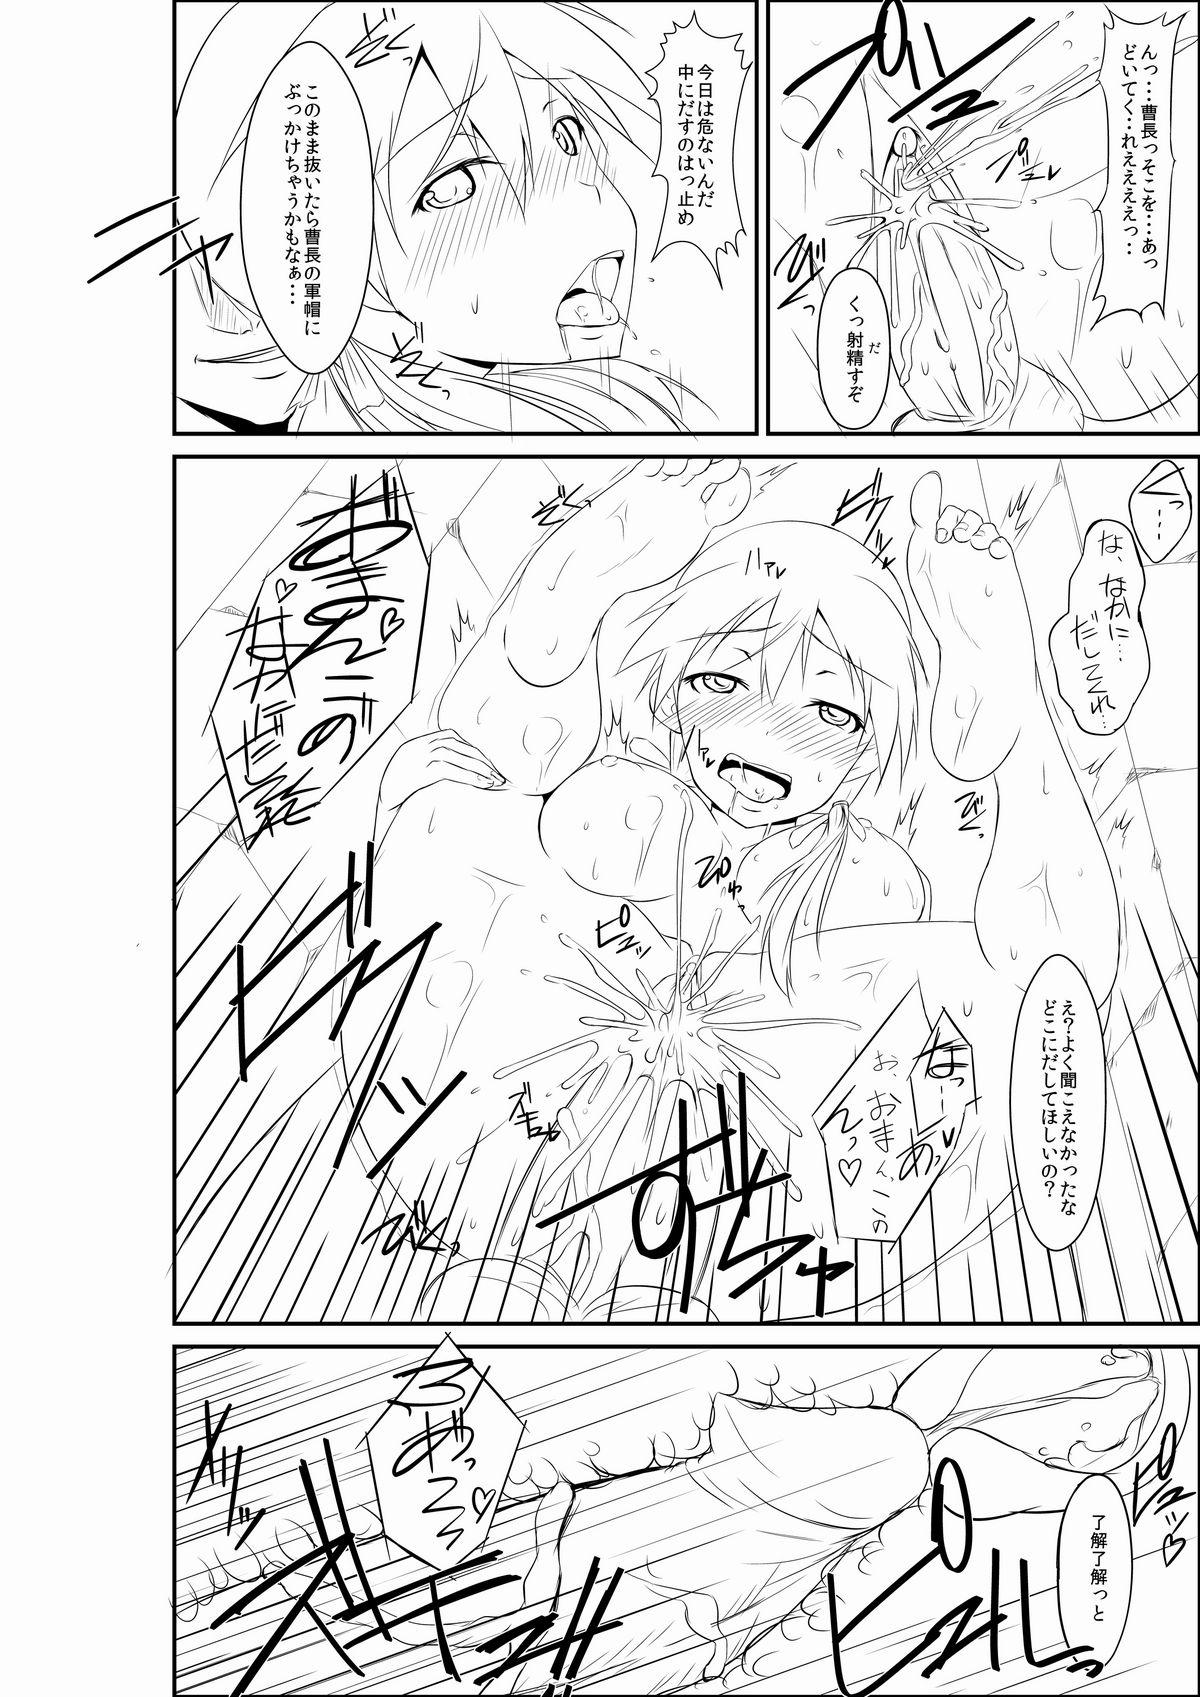 Orgasmo 練習 お姉ちゃんとヘルマちゃん - Strike witches Pounding - Page 10